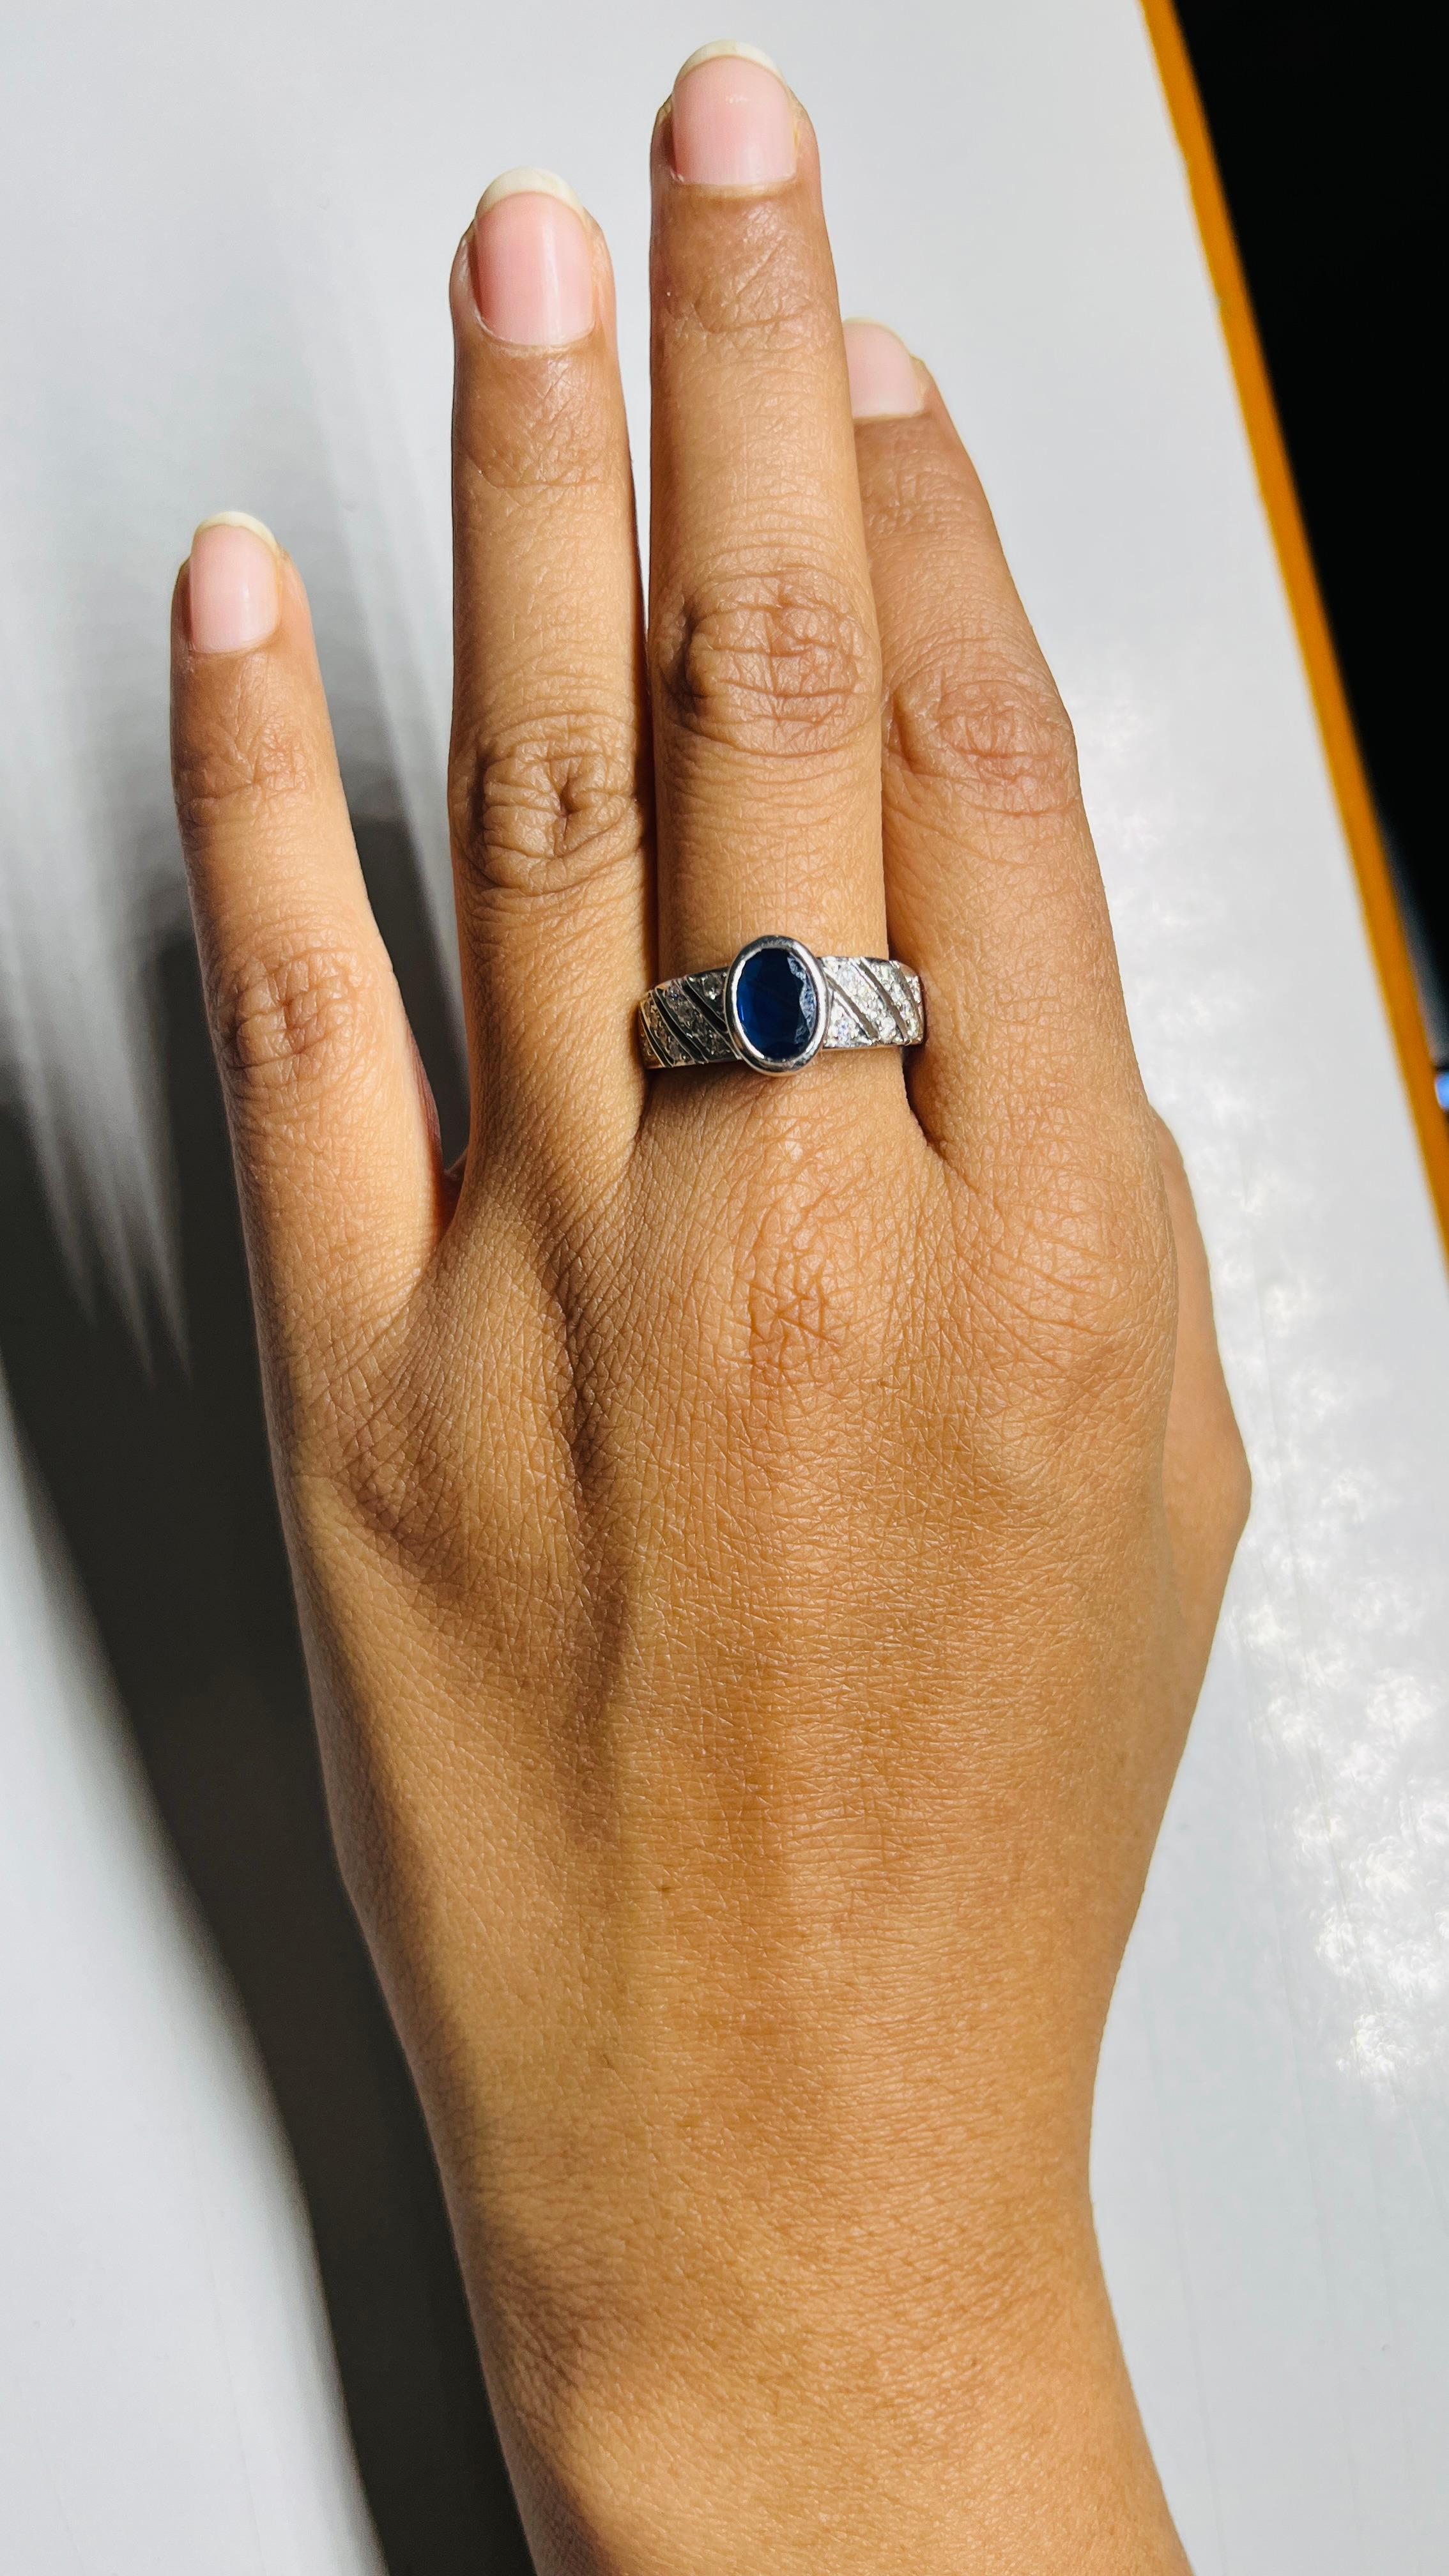 For Sale:  Exquisite Deep Blue Sapphire Diamond Unisex Engagement Ring in 18k White Gold 5